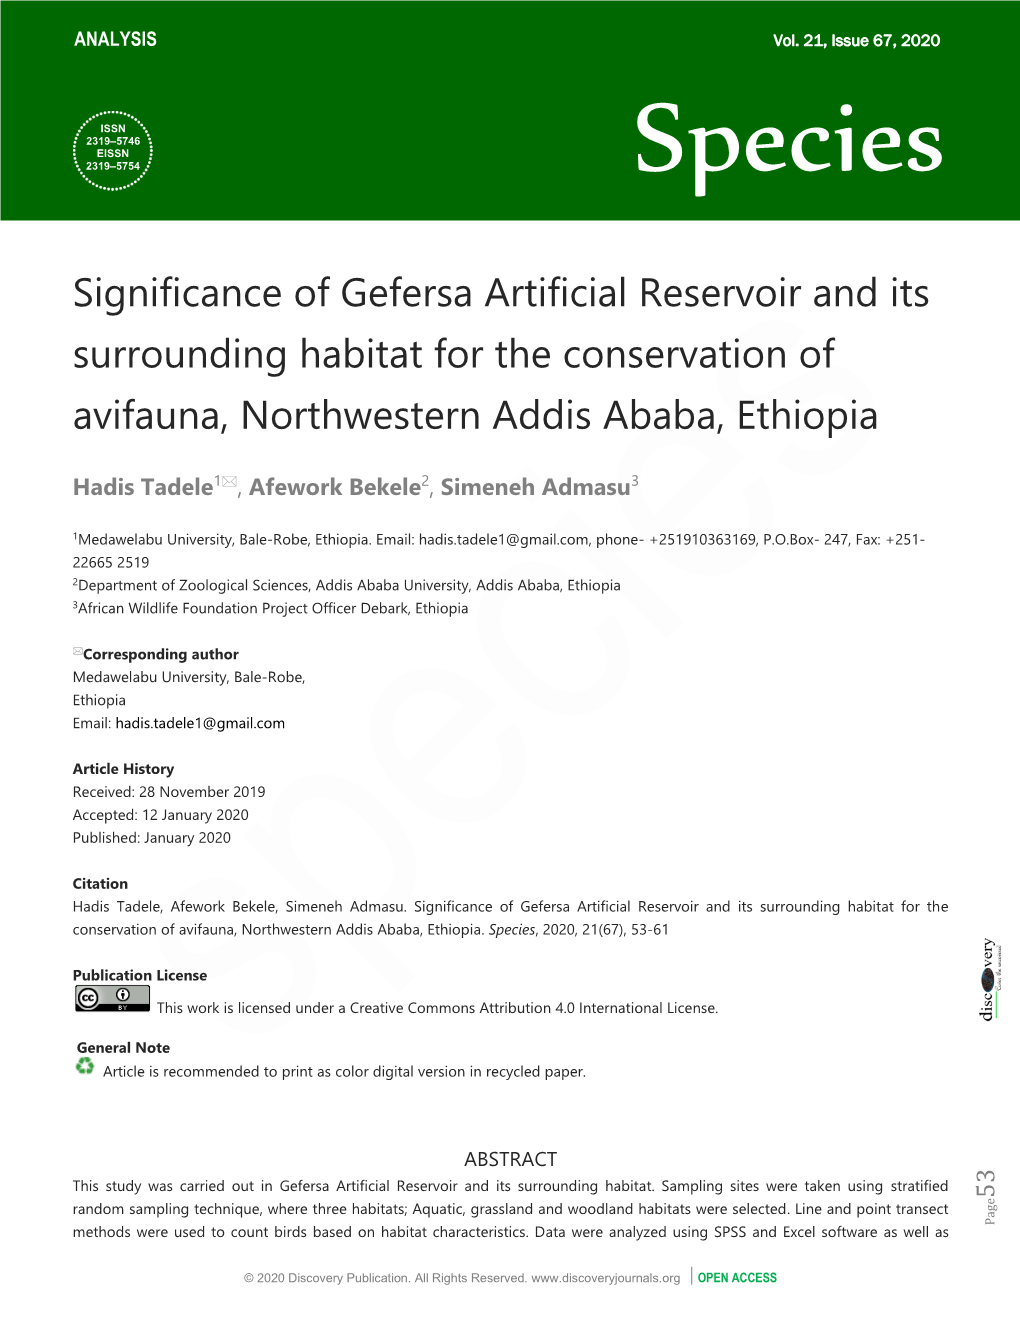 Significance of Gefersa Artificial Reservoir and Its Surrounding Habitat for the Conservation of Avifauna, Northwestern Addis Ababa, Ethiopia